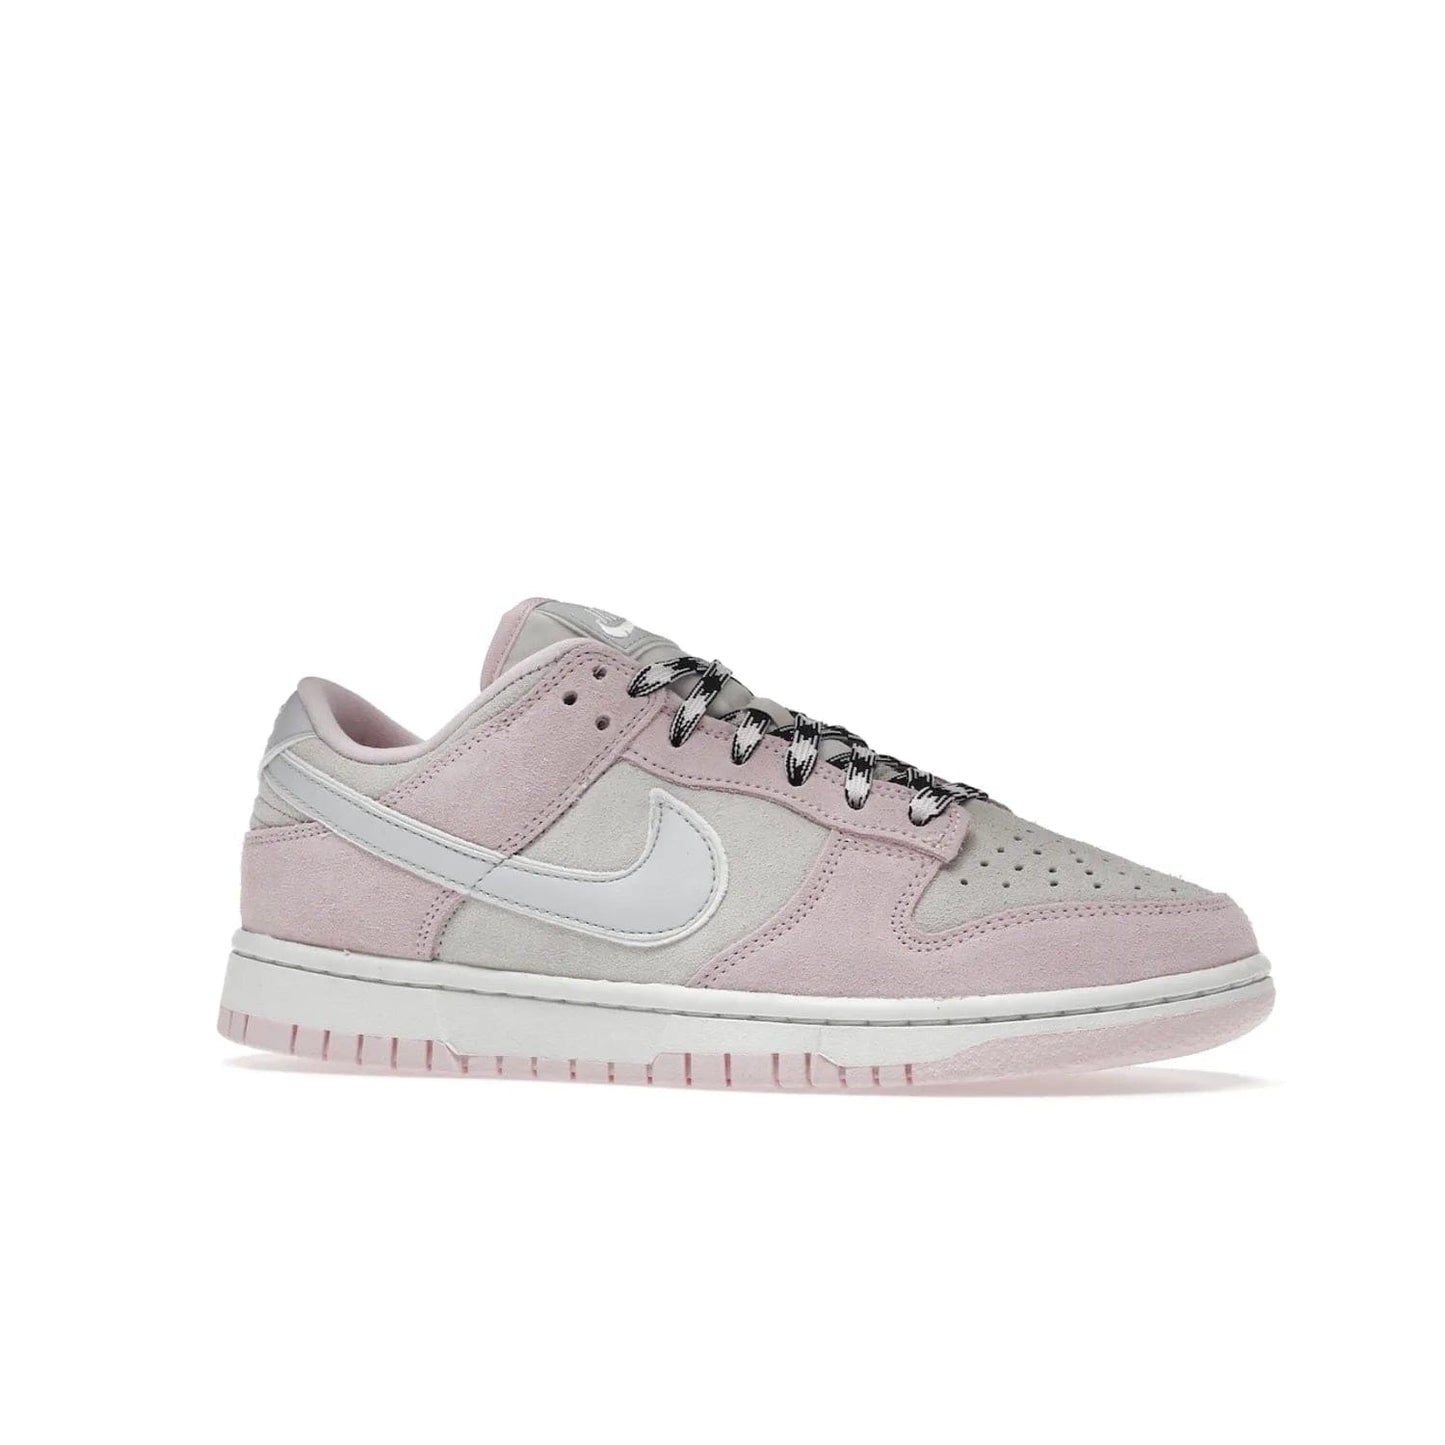 Nike Dunk Low LX Pink Foam (Women's) - Image 3 - Only at www.BallersClubKickz.com - Feminine & fashionable Nike Dunk Low LX Pink Foam W sneaker. Featuring leather and synthetic materials and durable rubber sole. Lace-up design ensures a snug fit. Released Dec. 10th 2022, $120. Stylish and comfortable.